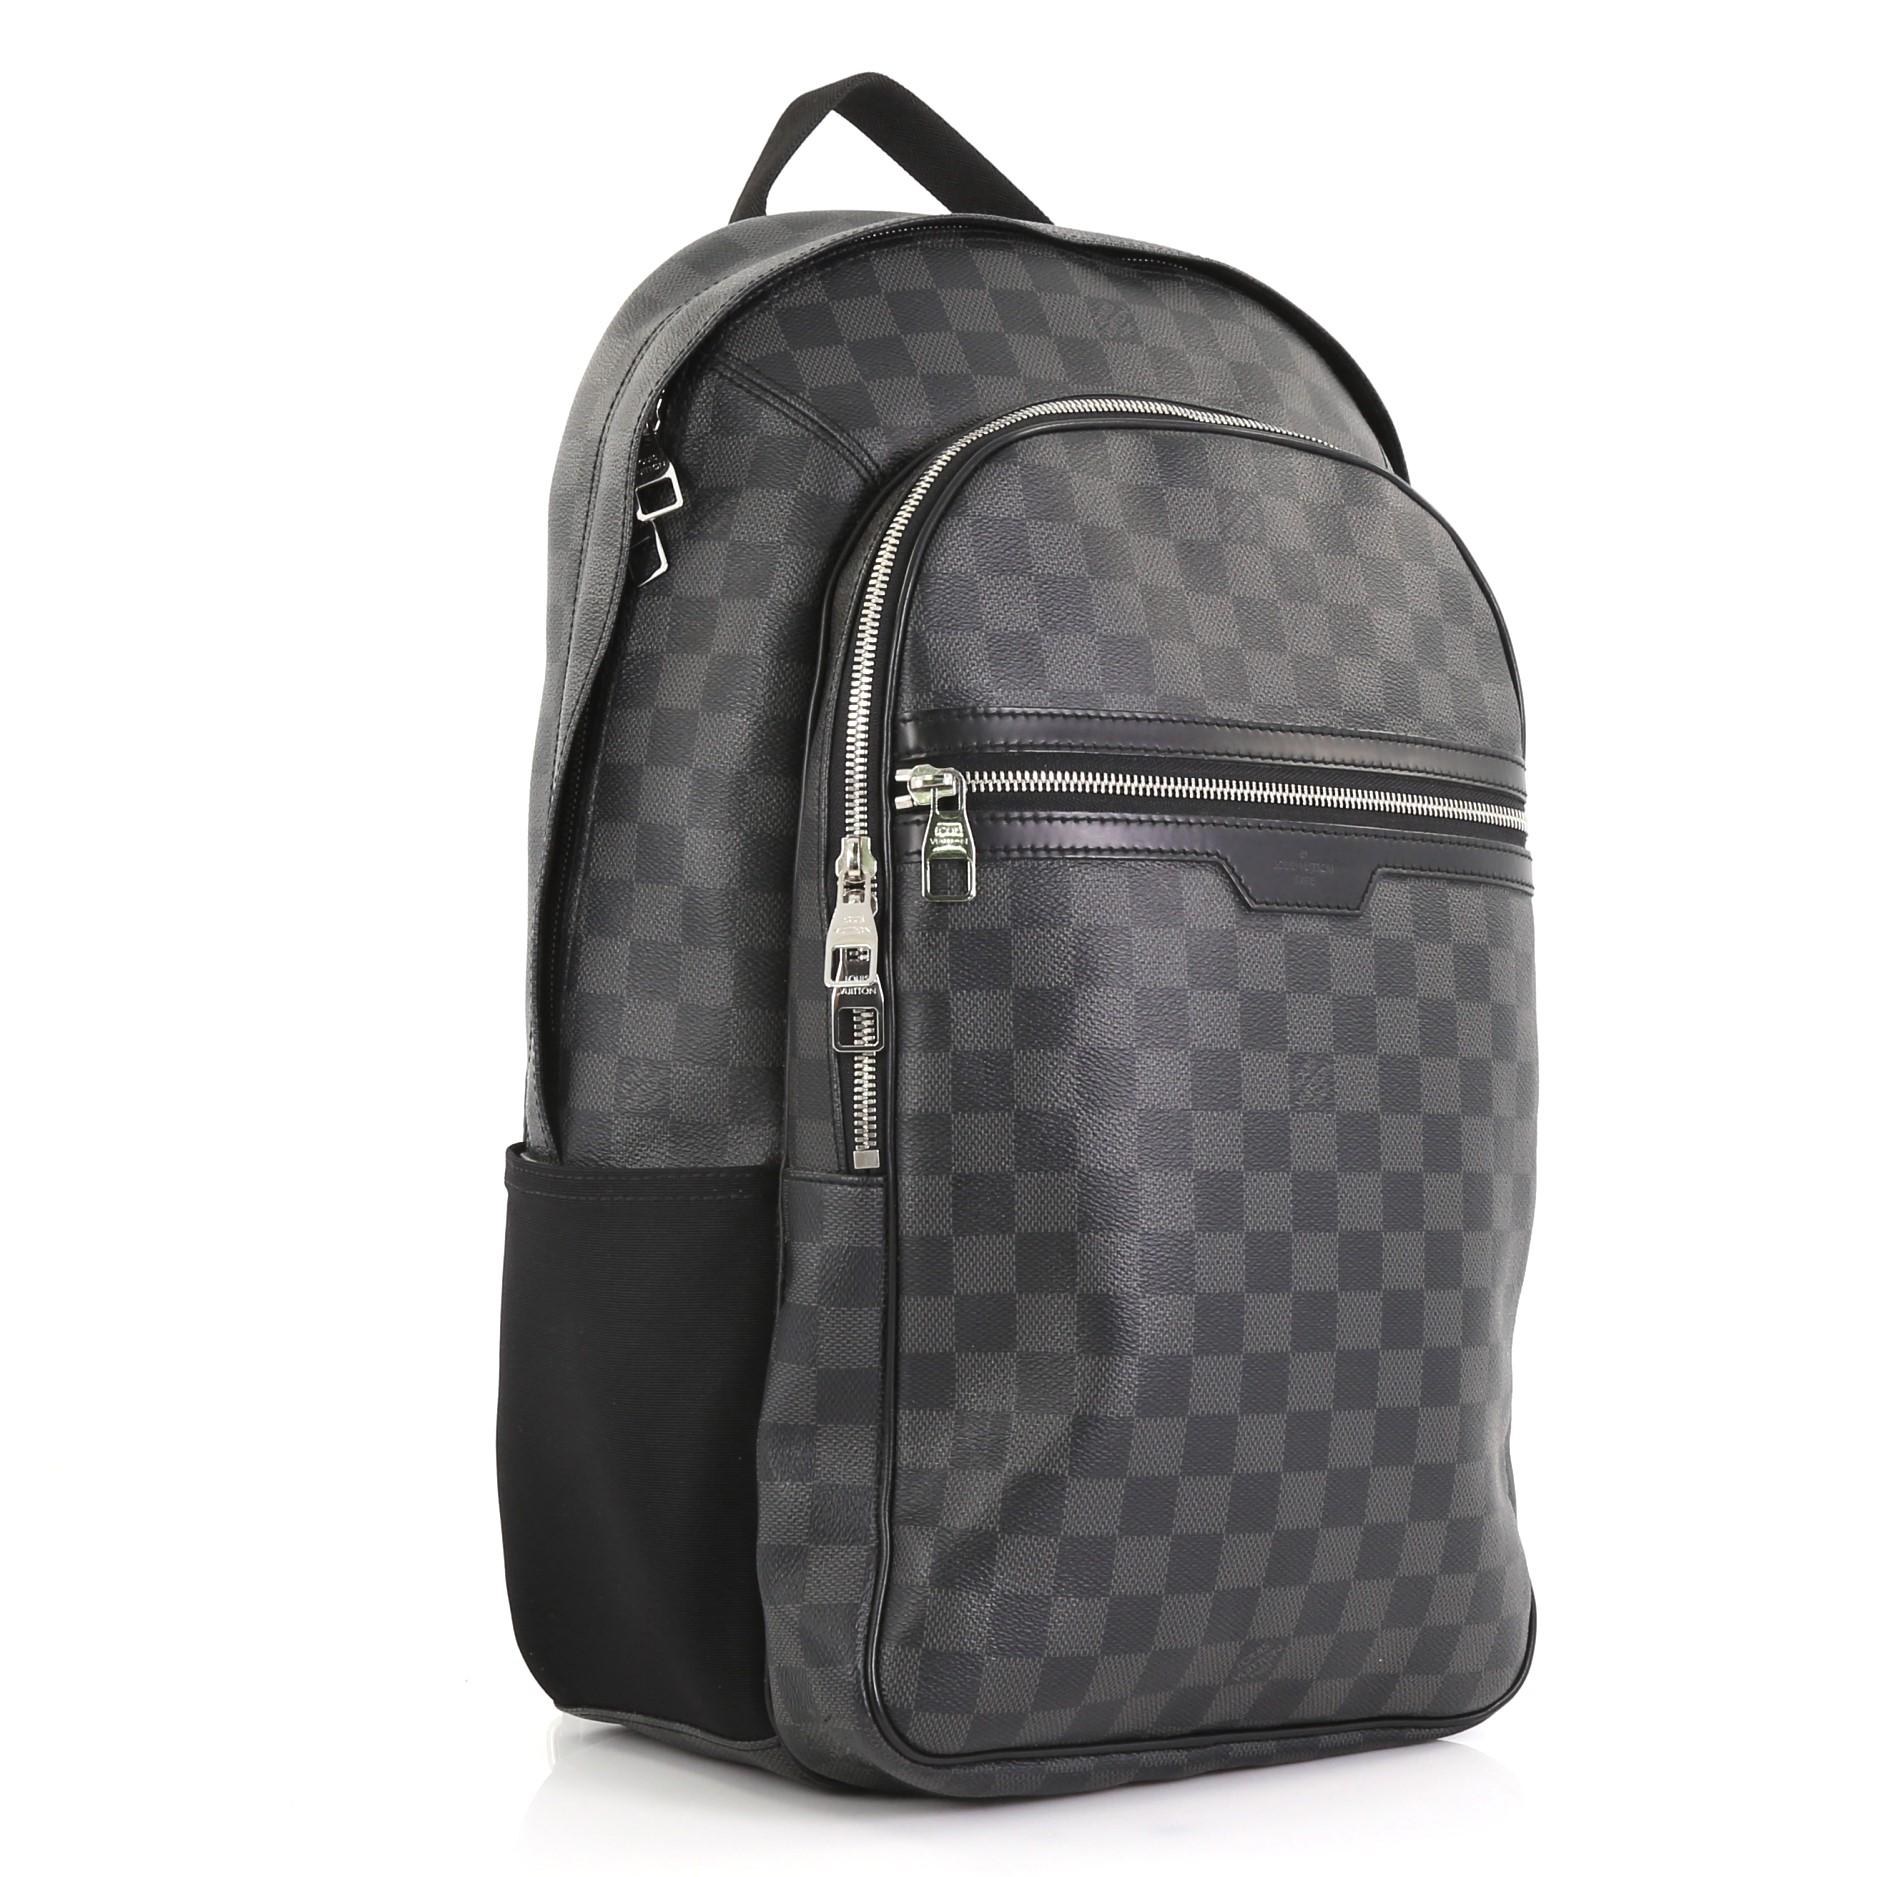 This Louis Vuitton Michael Backpack Damier Graphite, crafted from damier graphite coated canvas, features top leather handle, two canvas padded backpack straps, leather trim, two exterior front zip pockets, one compartment with slip pockets and